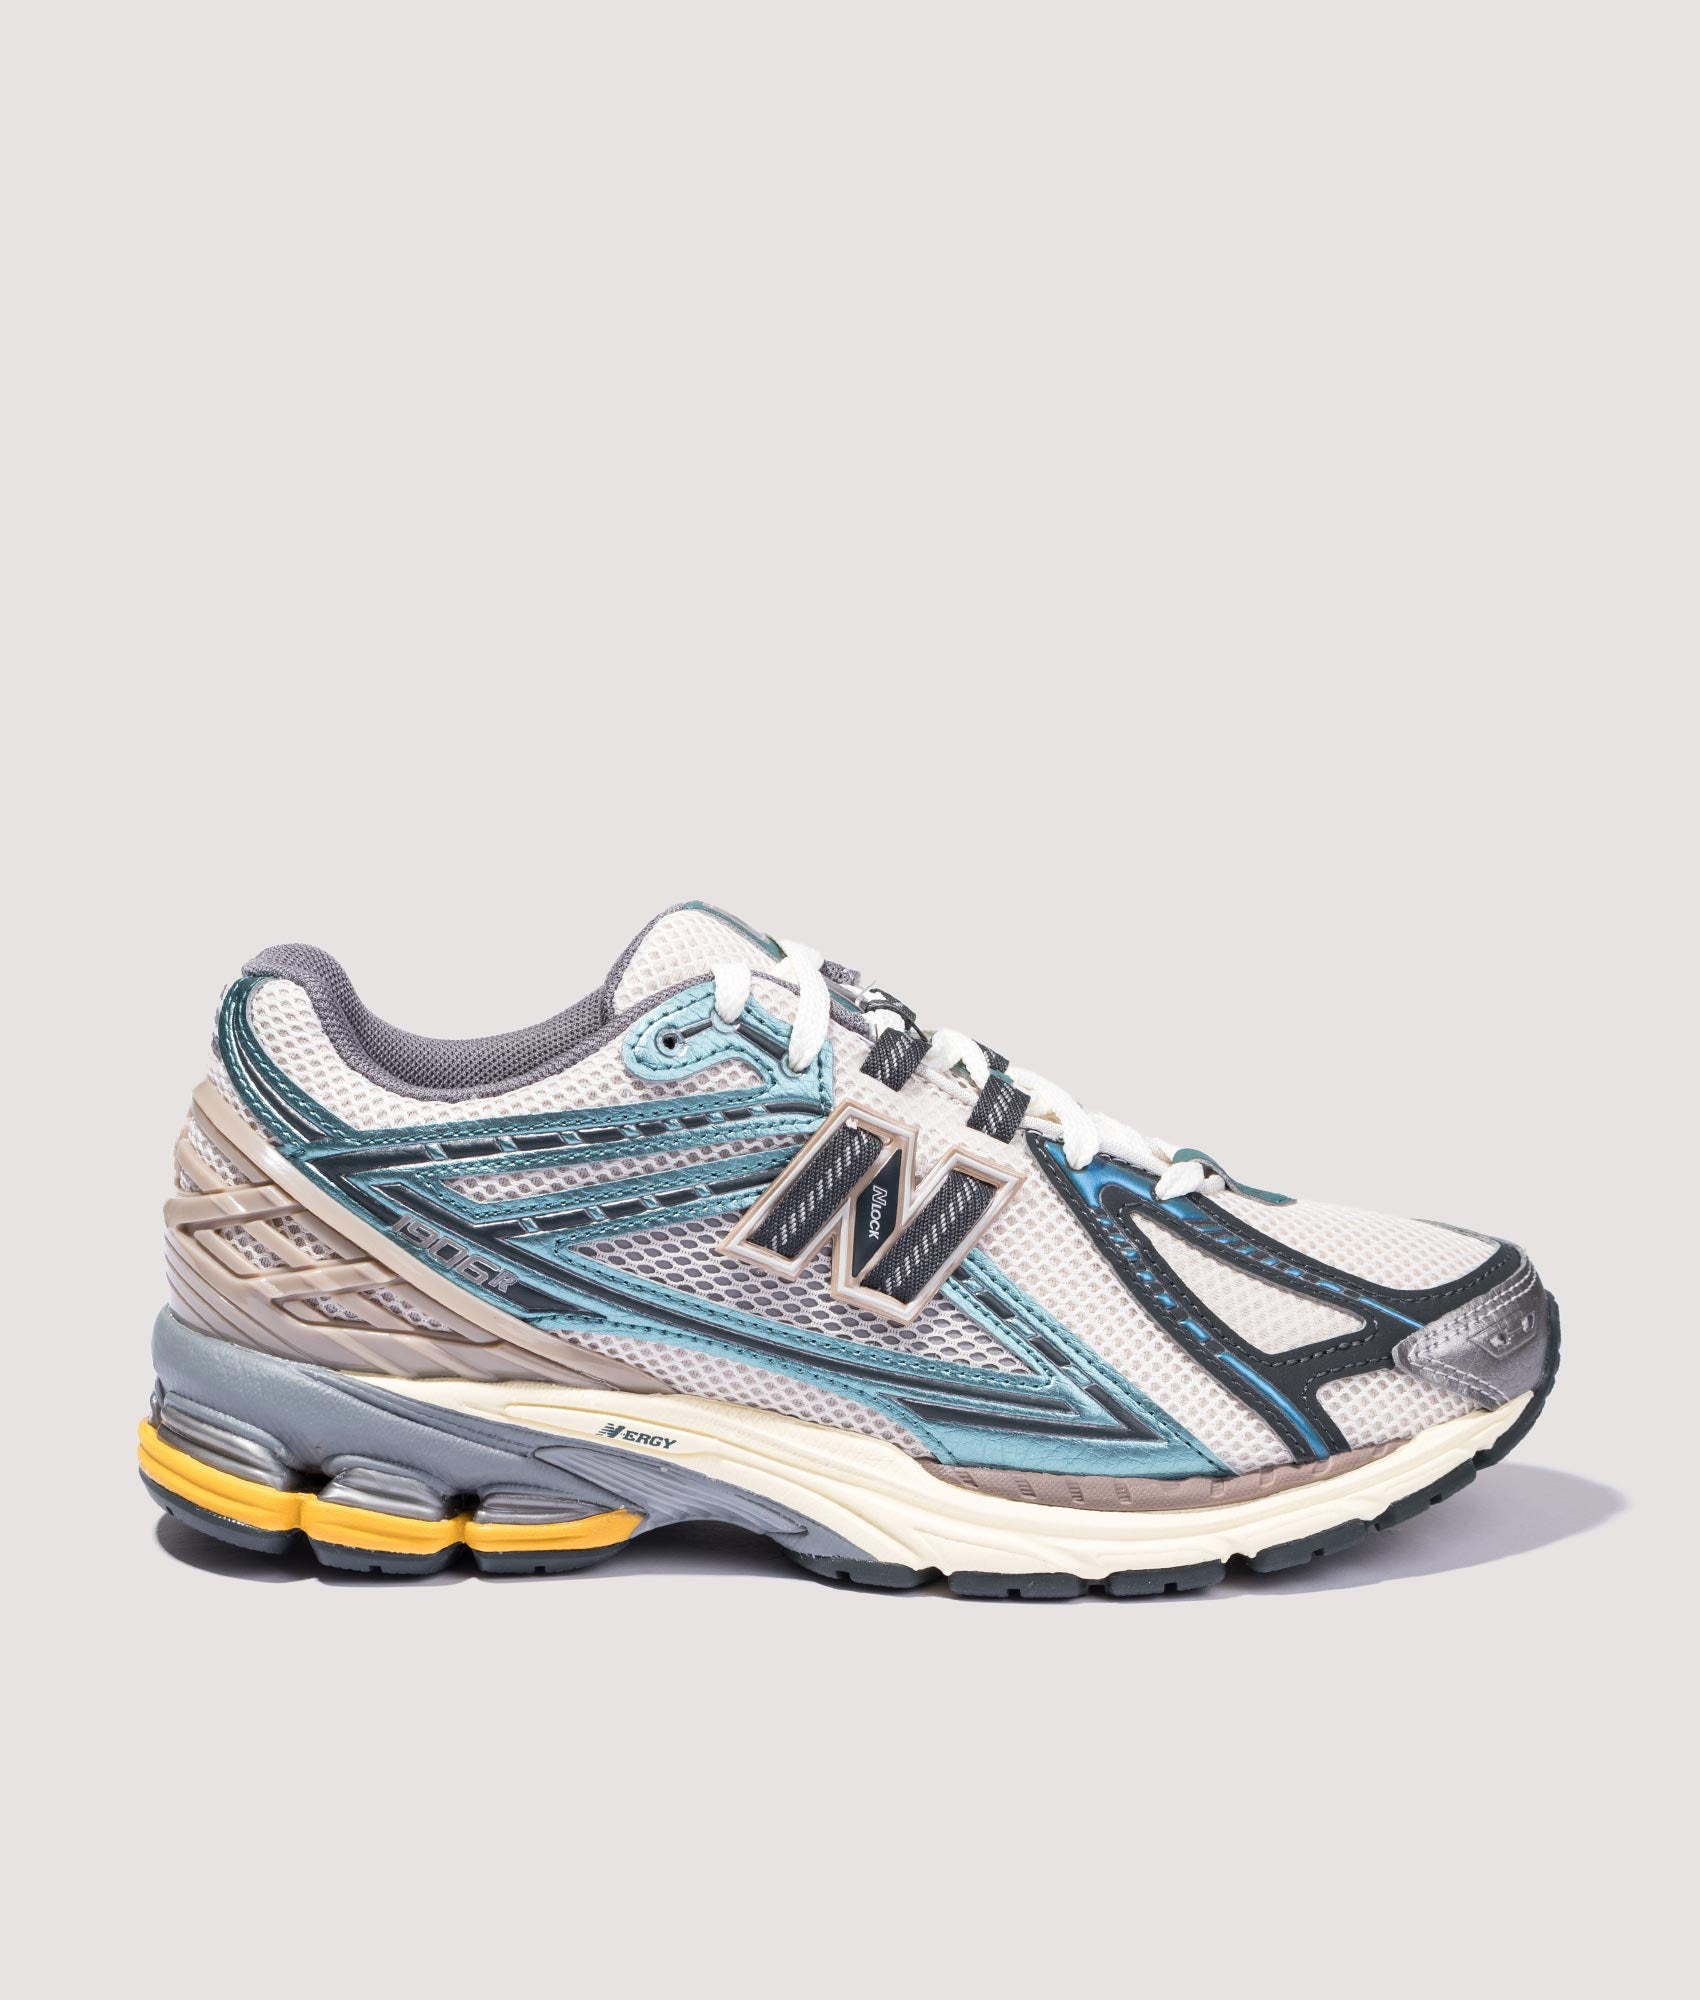 New Balance Mens 1906R Sneakers - Colour: M1906RRC New Spruce/Moonbeam/Driftwood - Size: 7